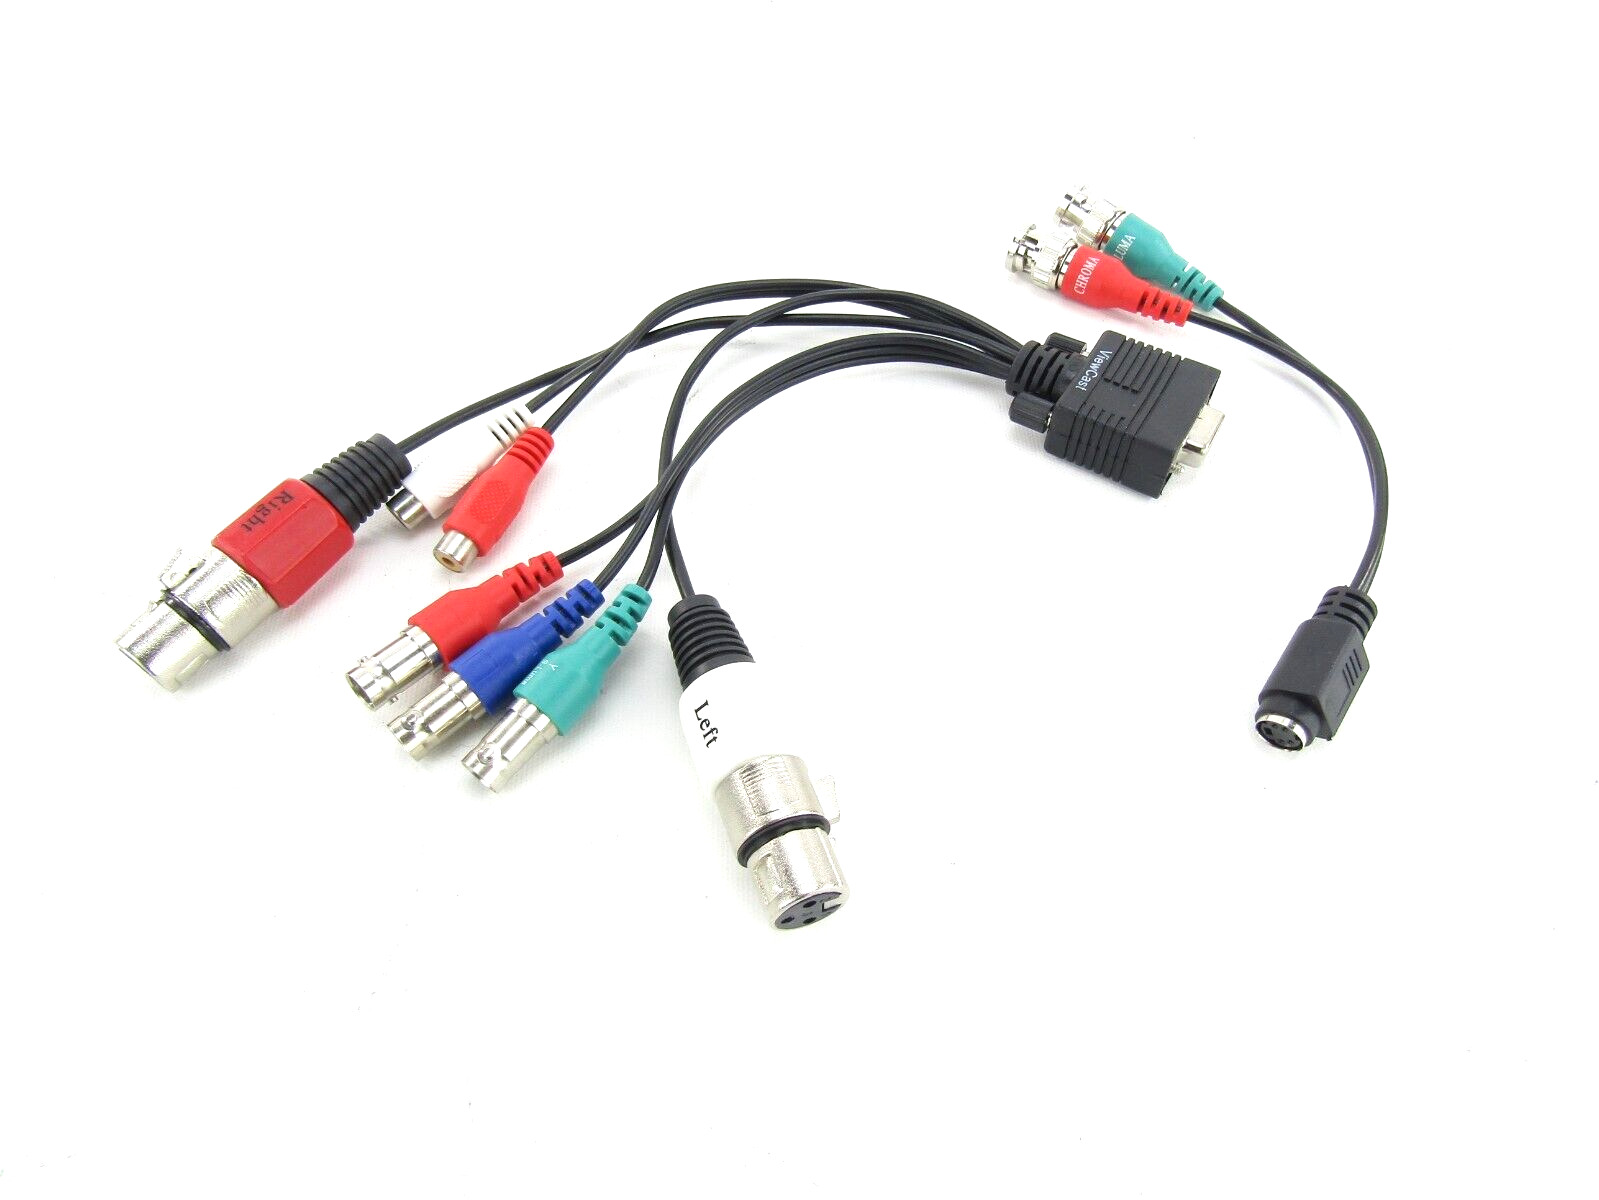 ViewCast Osprey Component Video Breakout Cable for Capture Card